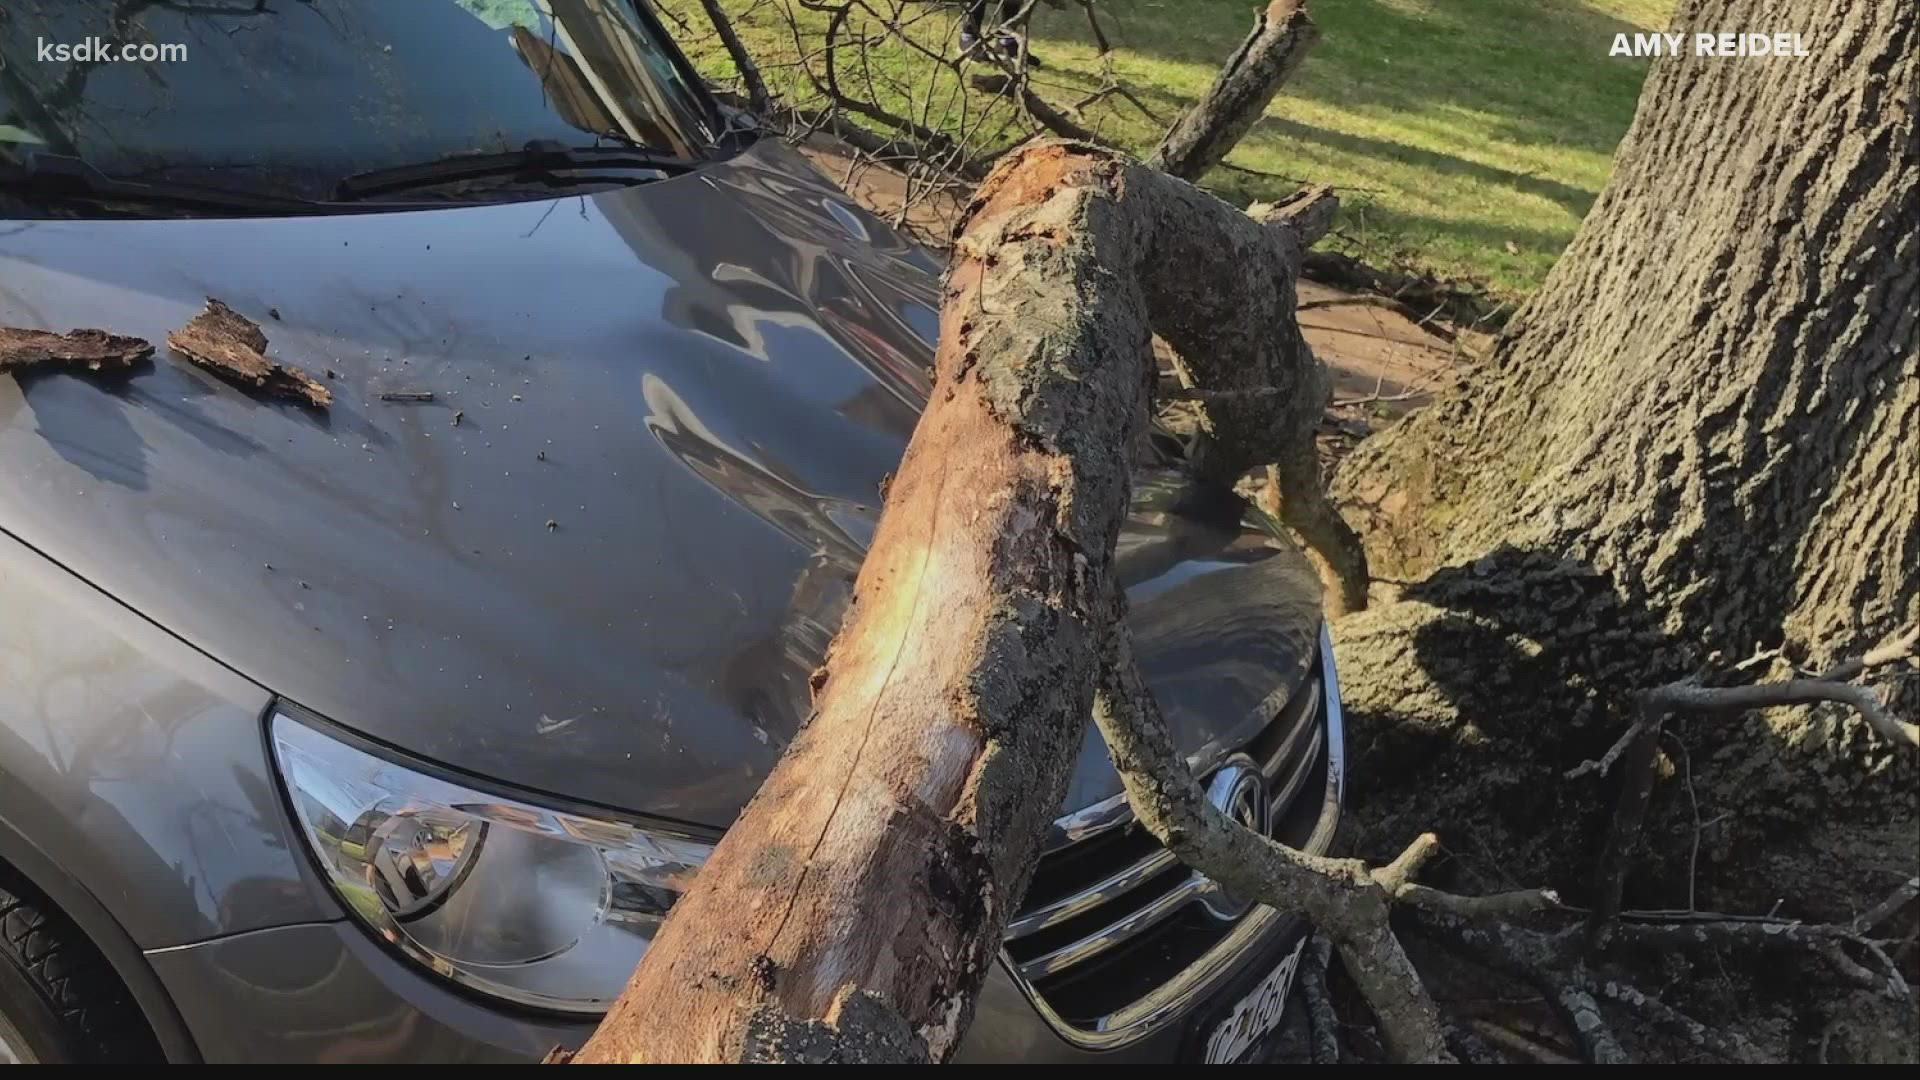 A neighborhood in South St. Louis is fed up with the city's forestry department. They say trees on their street are neglected and it's leading to property damage.